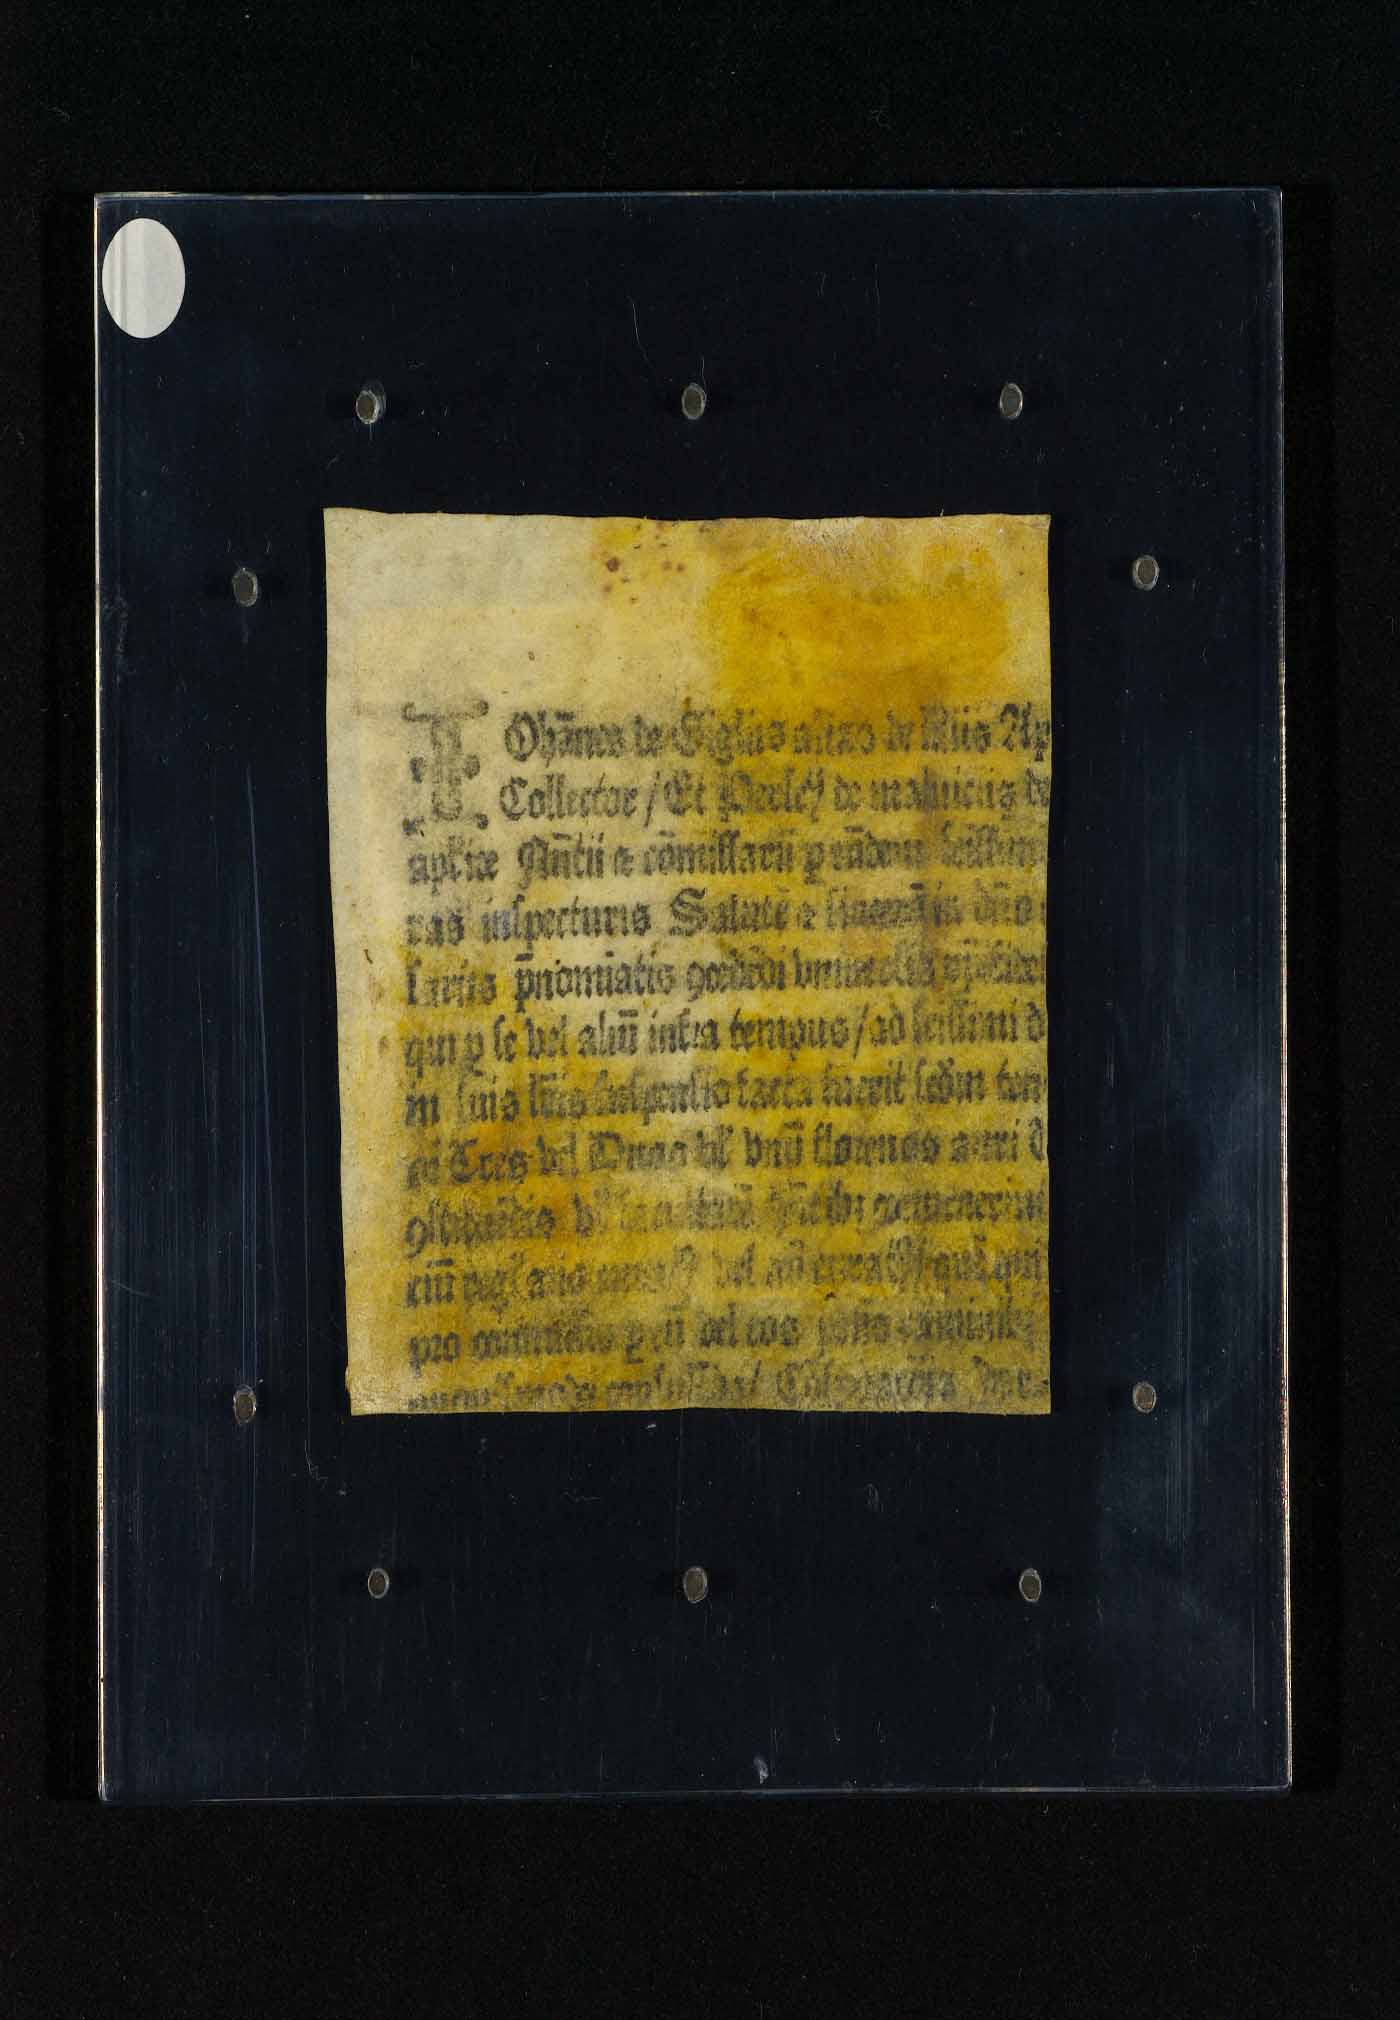 Indulgence, printed by Caxton